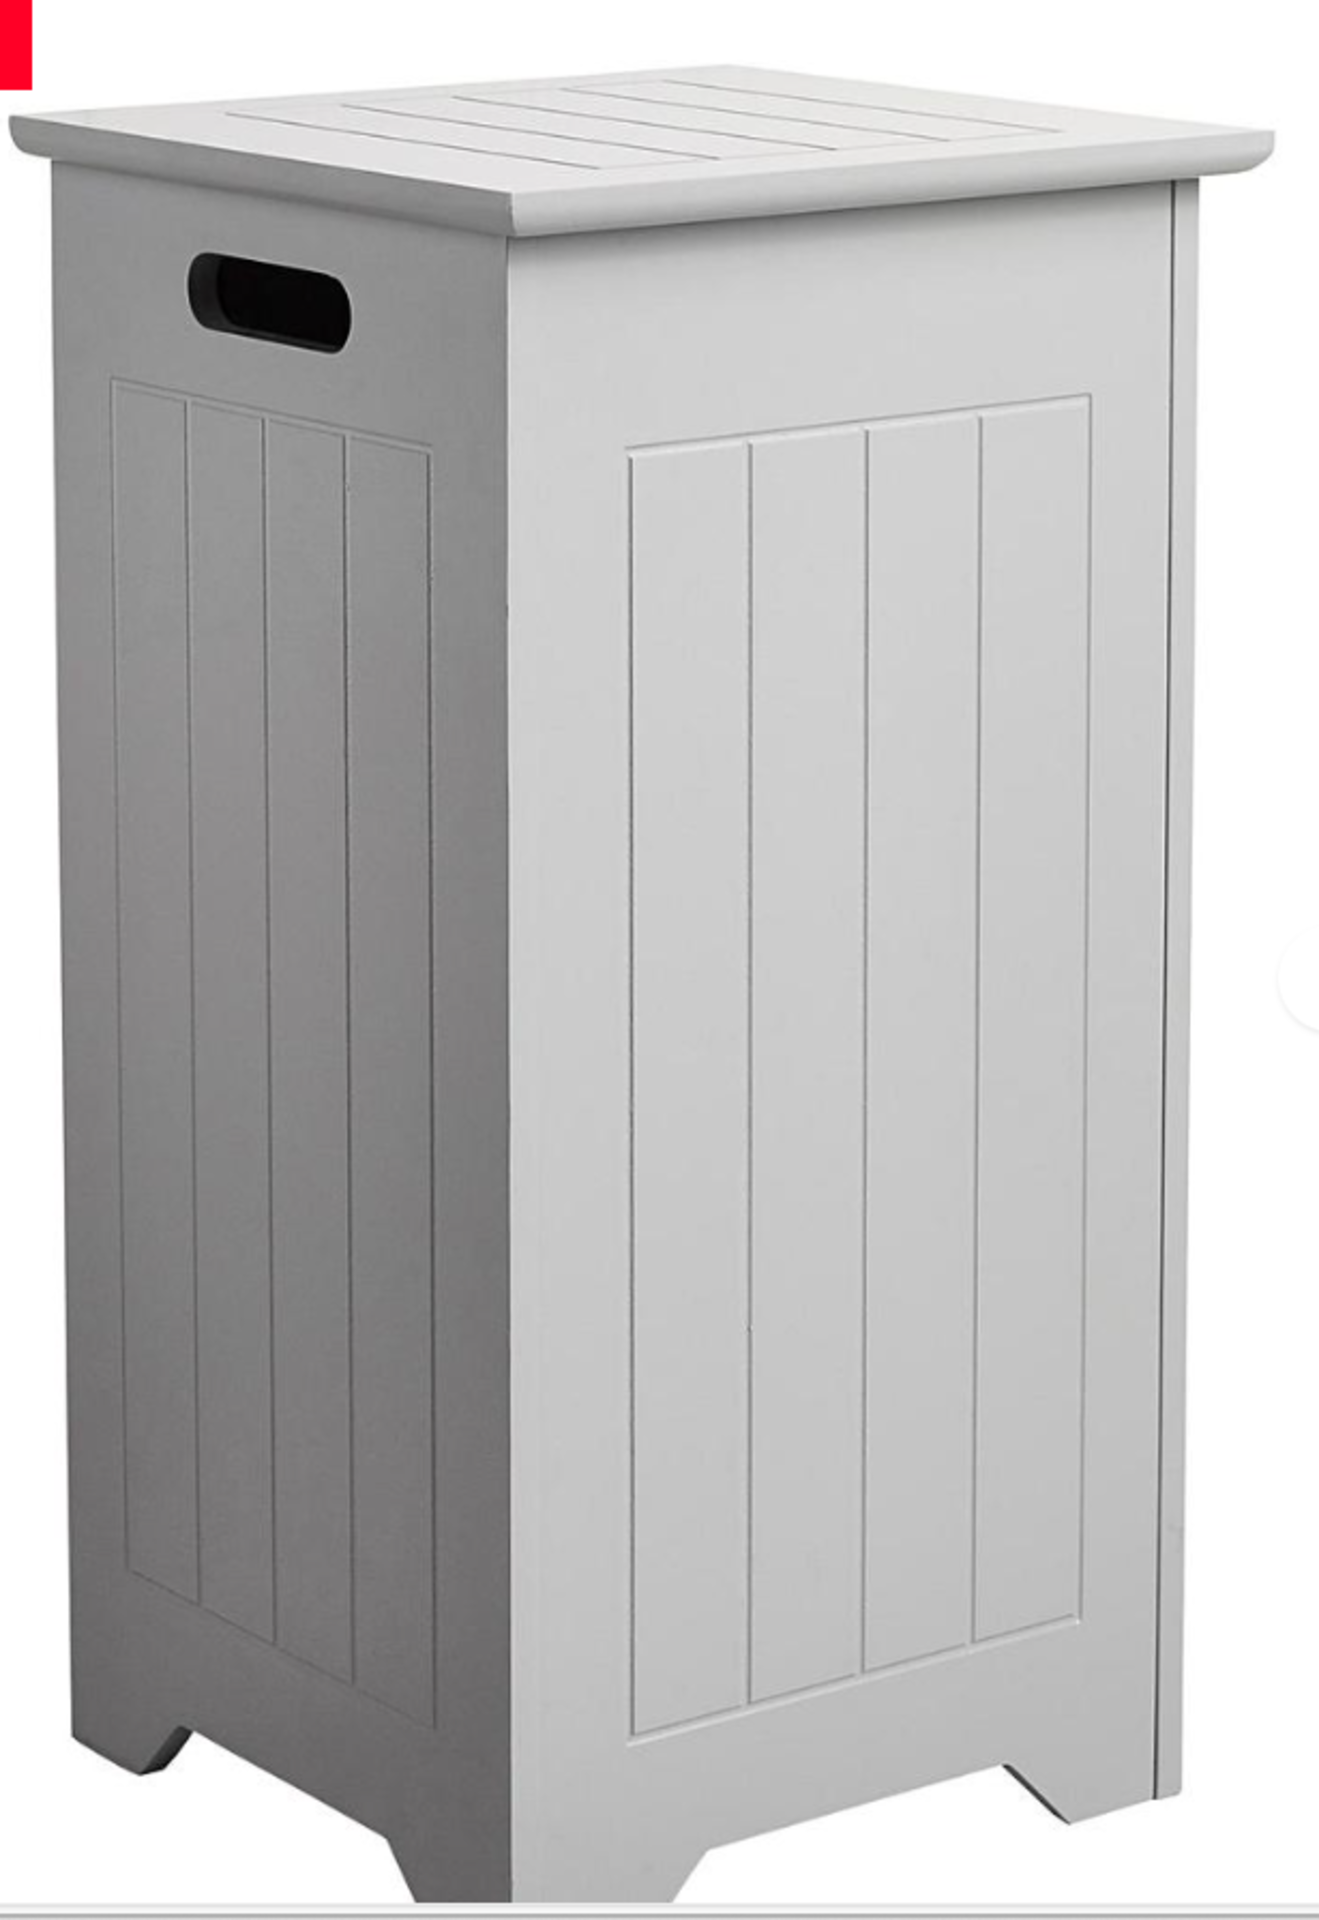 New England Slimline Laundry Hamper. - ER28. Clean, pretty and boasting a gorgeous country style,